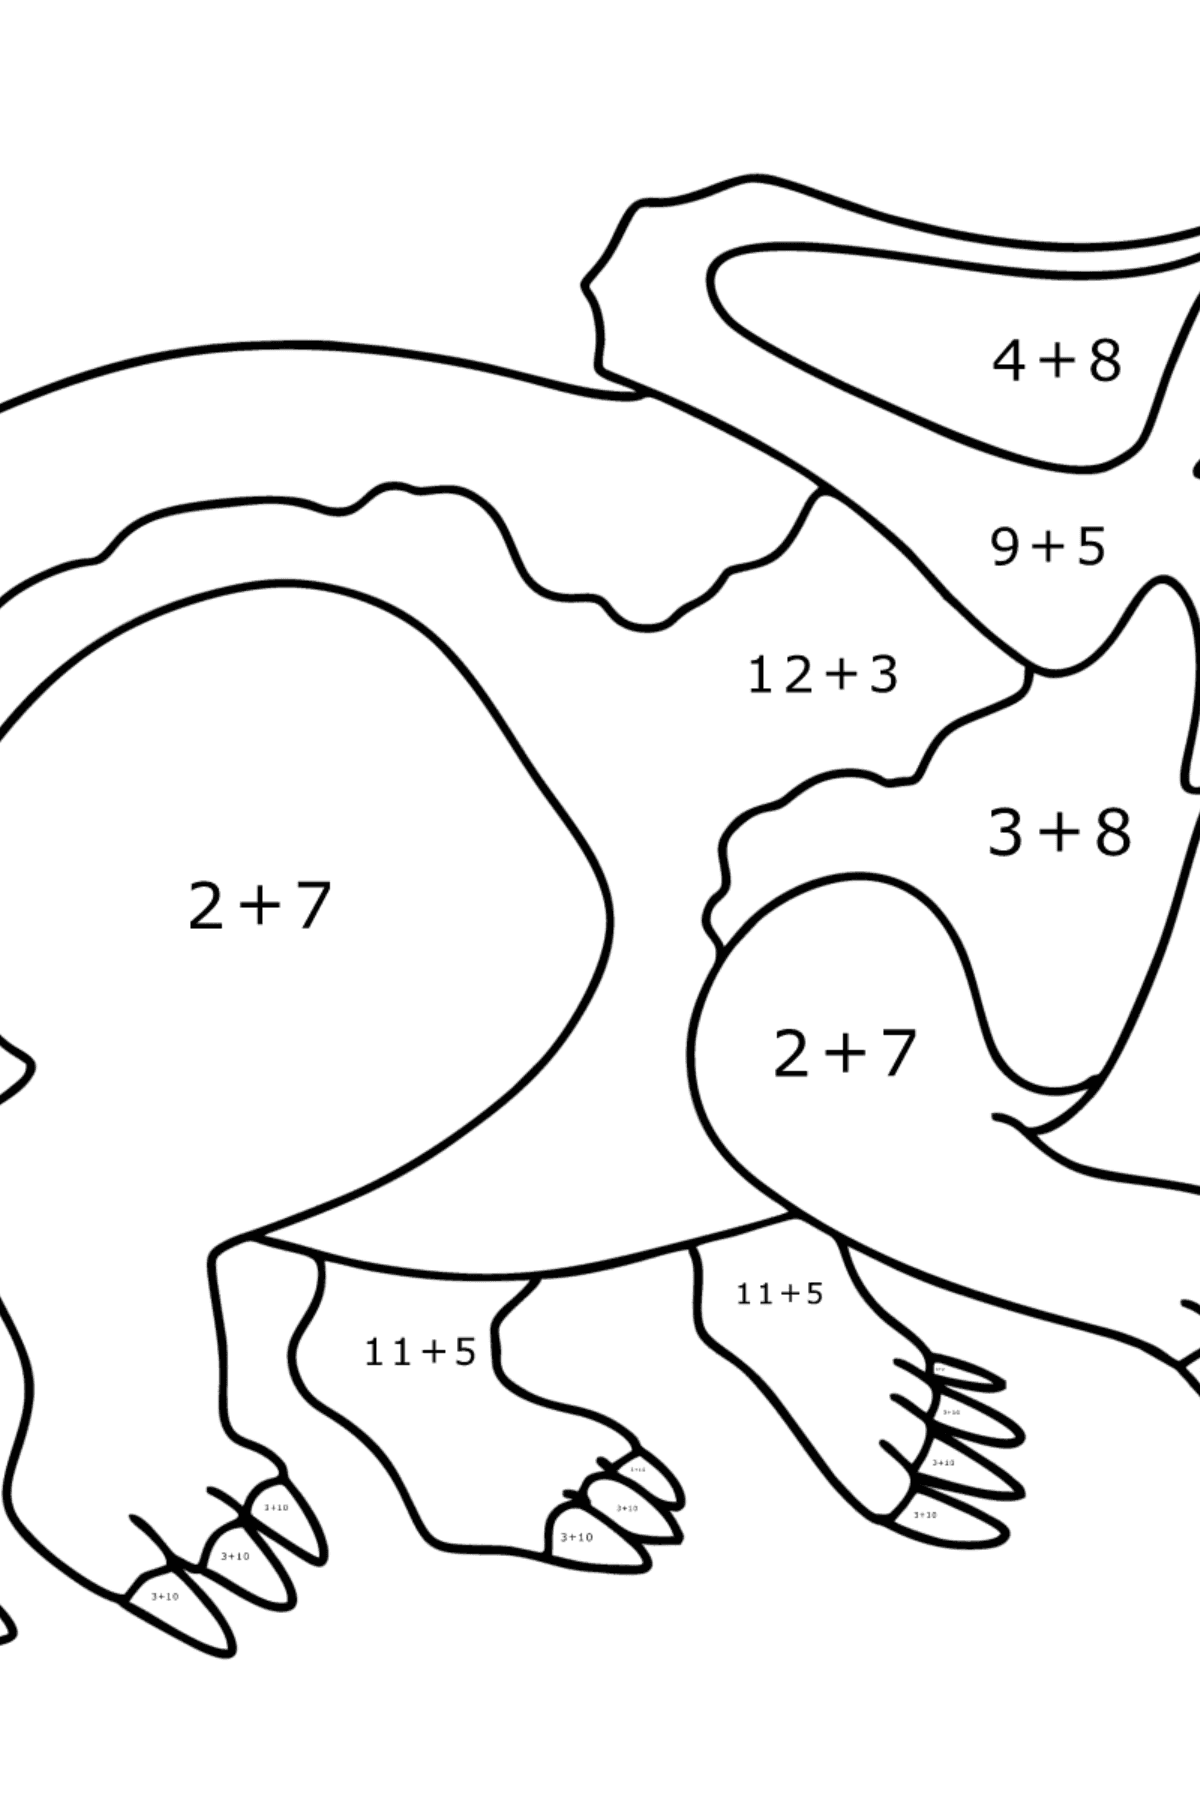 Protoceratops coloring page - Math Coloring - Addition for Kids